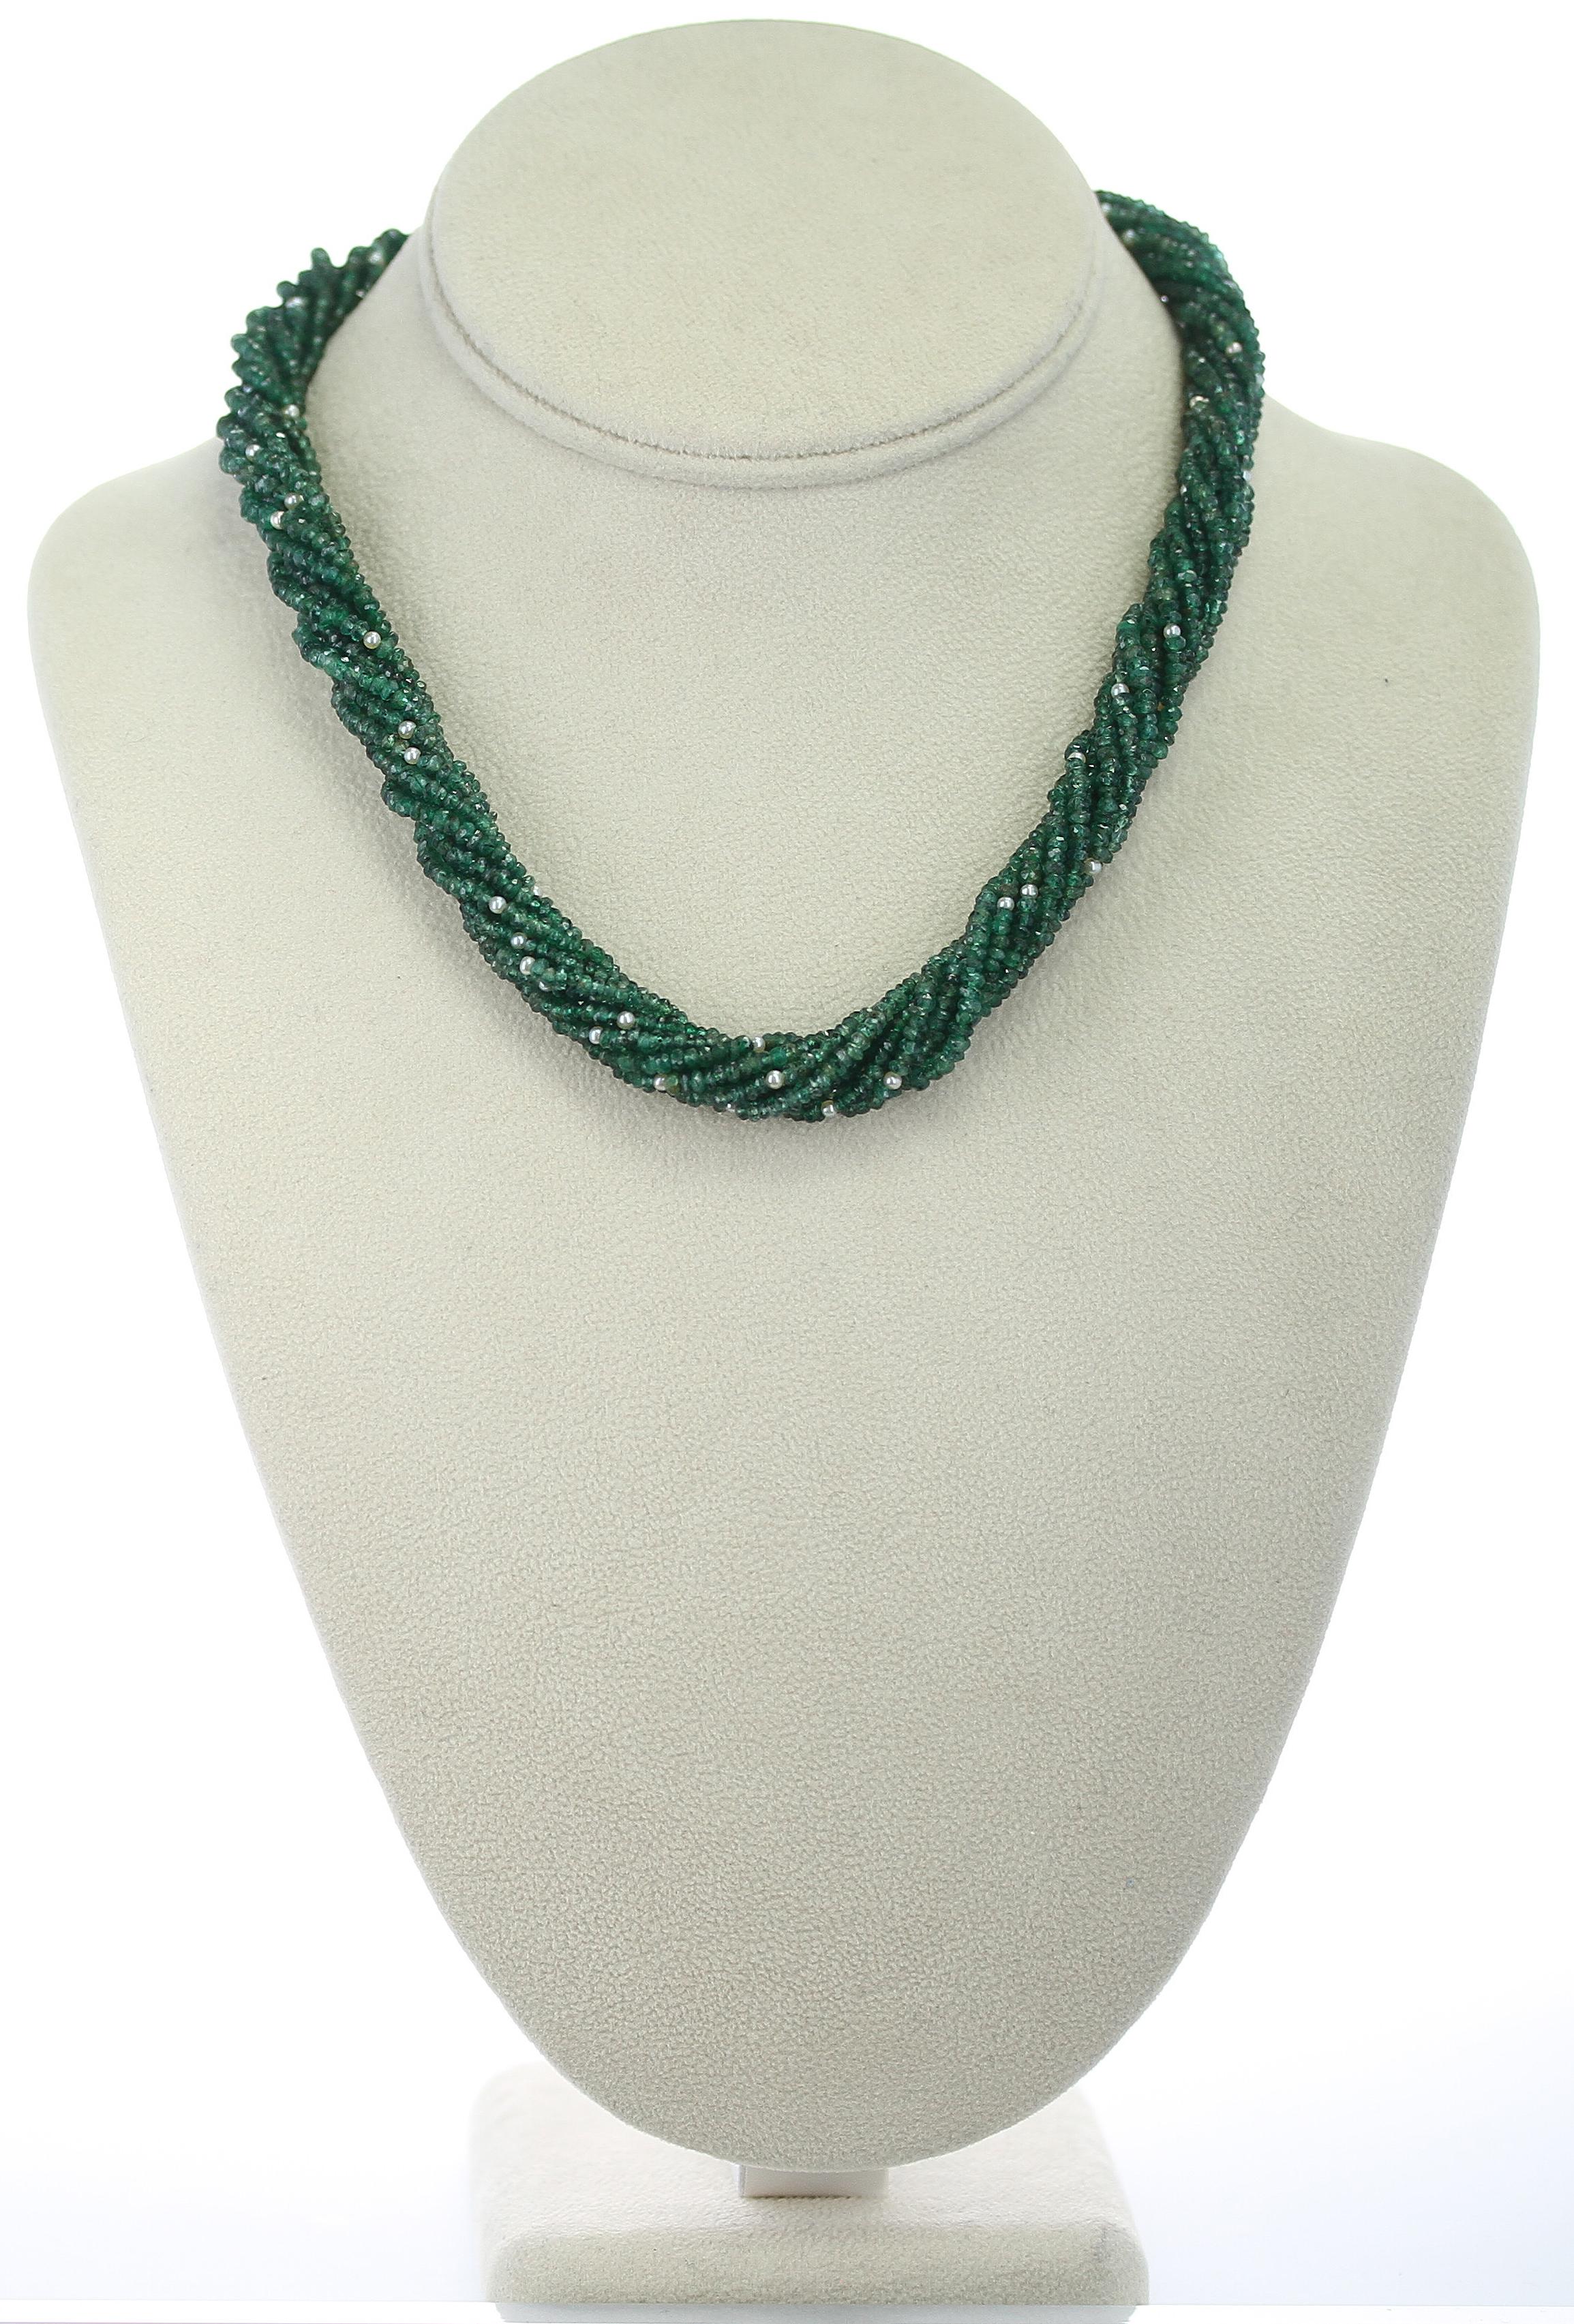 A Genuine & Natural Faceted Emerald Beads with Pearls Choker Necklace consisting of 10 Lines, weighing 252 carats. The length is 18